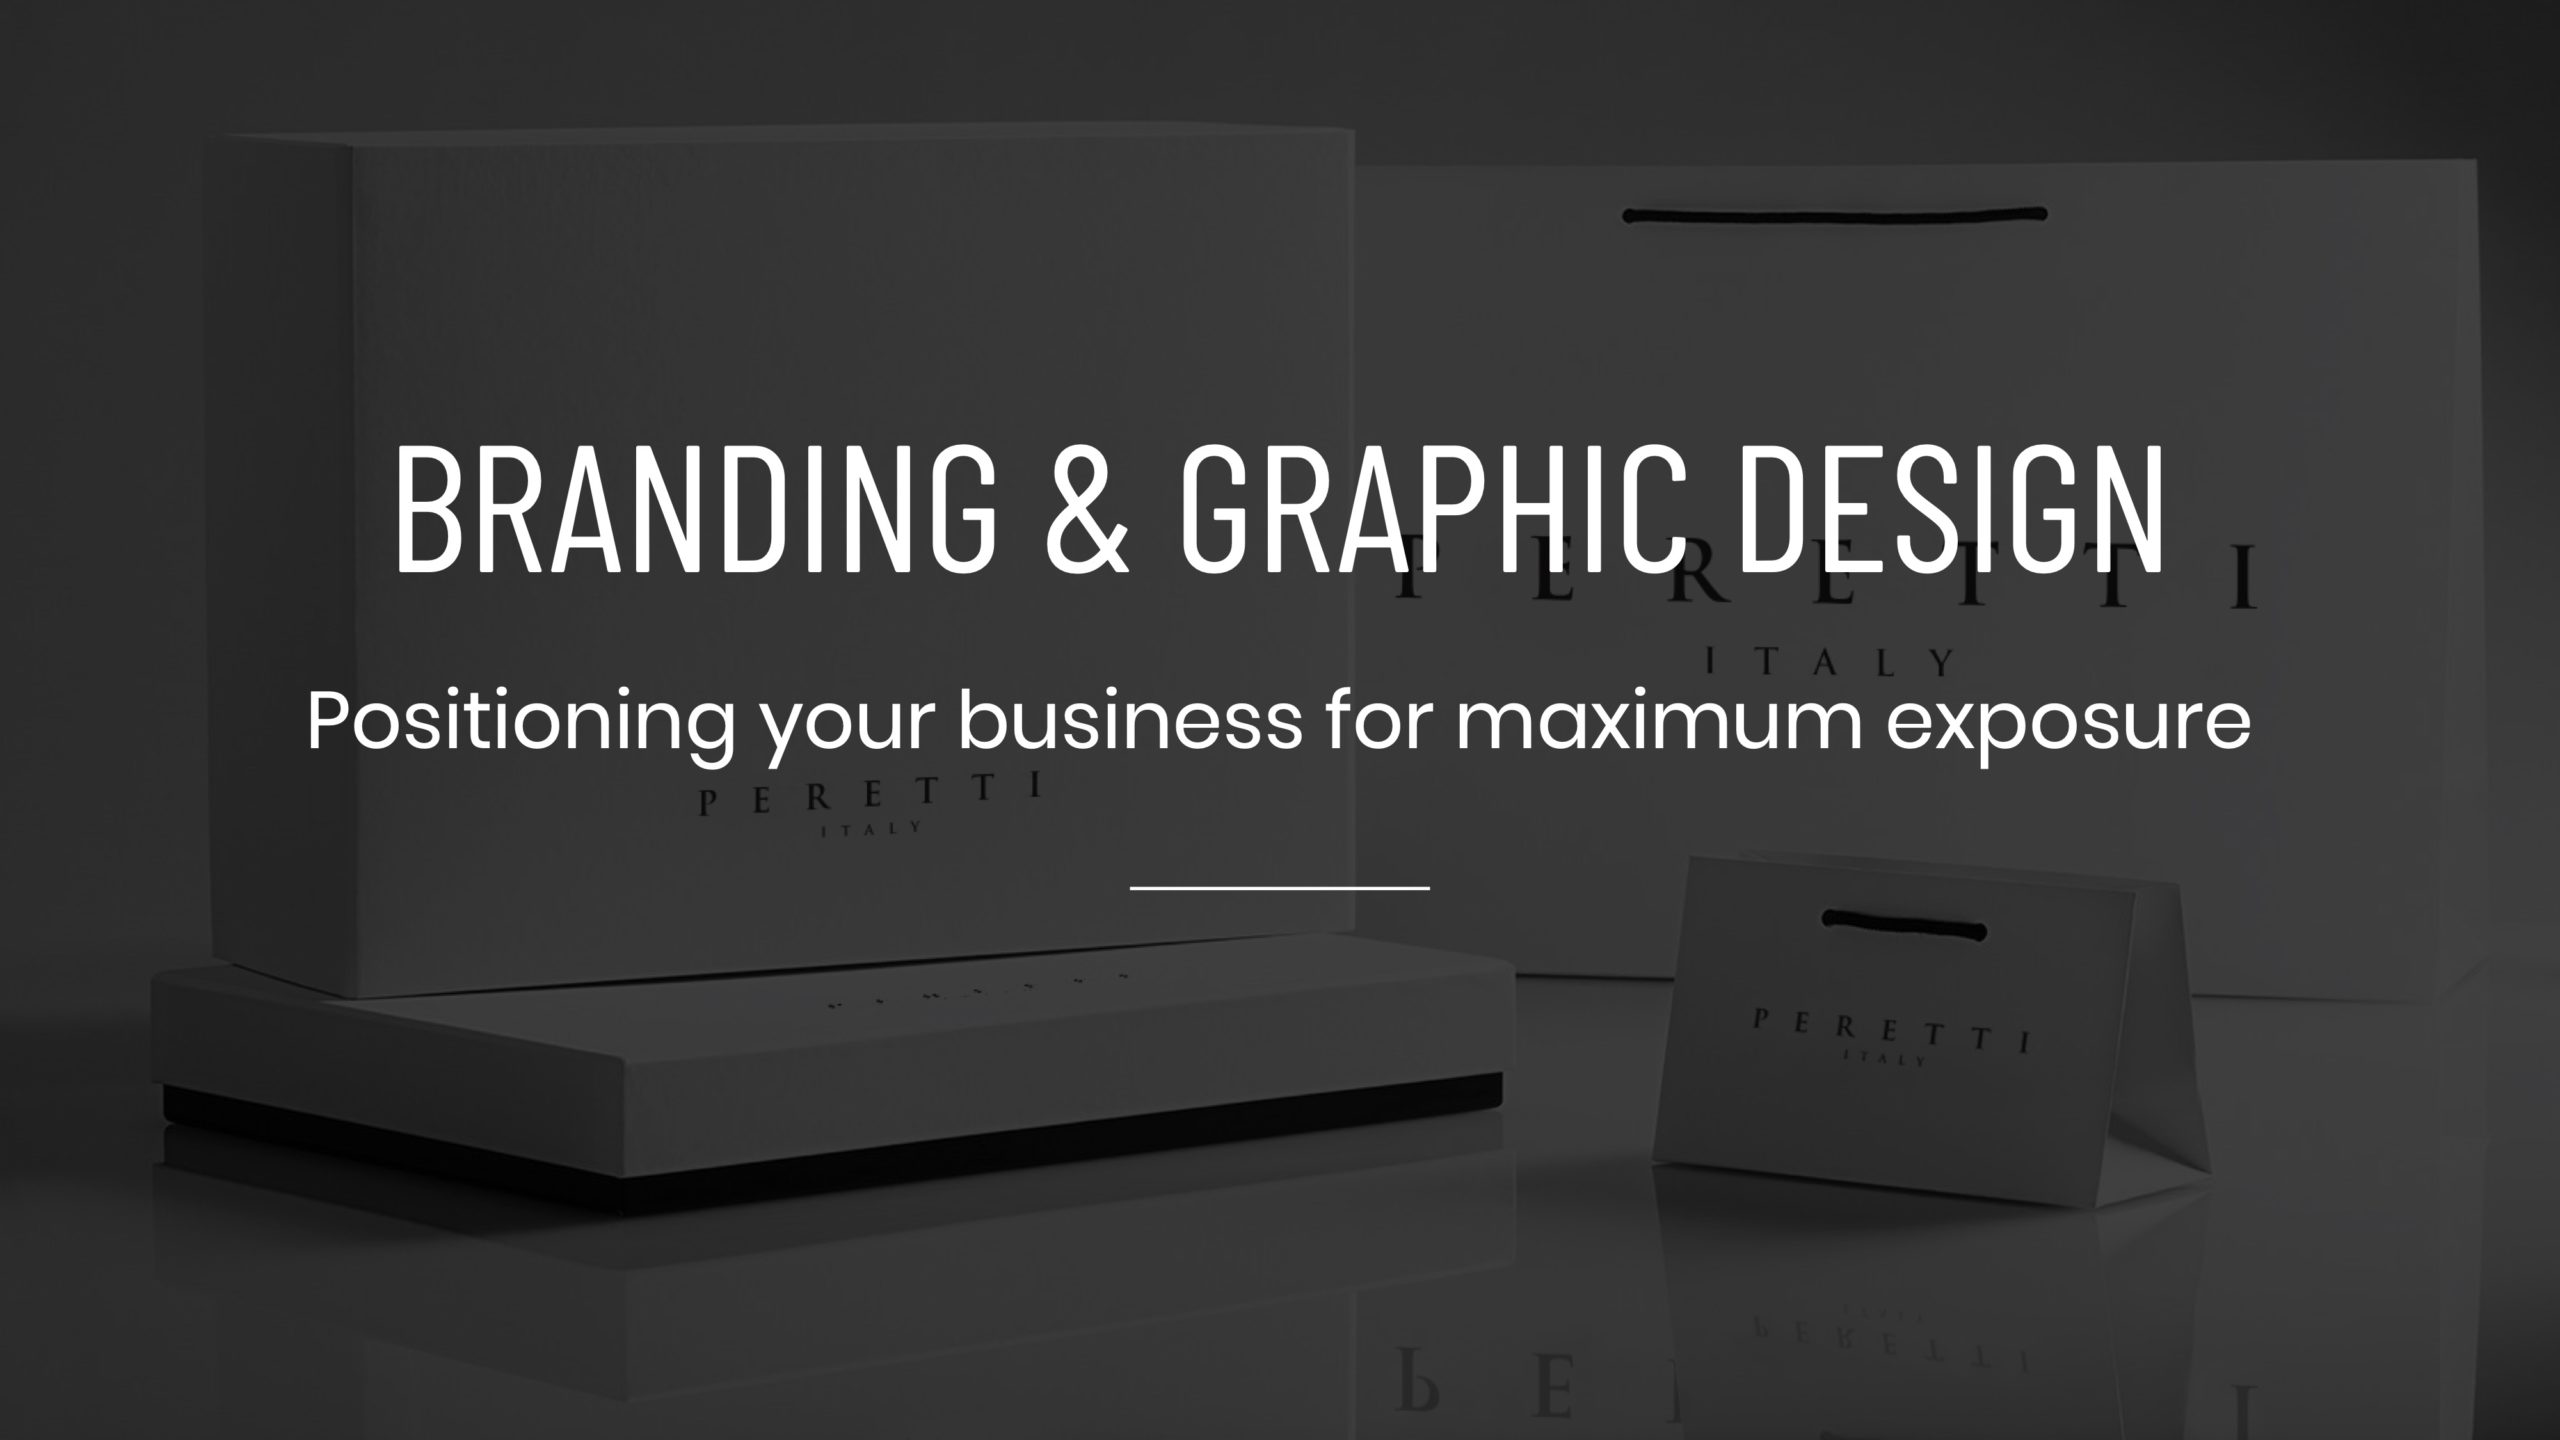 White Branding and Graphic Design Positioning Your Business for Maximum Exposure title Service Tile on dimmed background of Peretti Italy boxes and bags on display